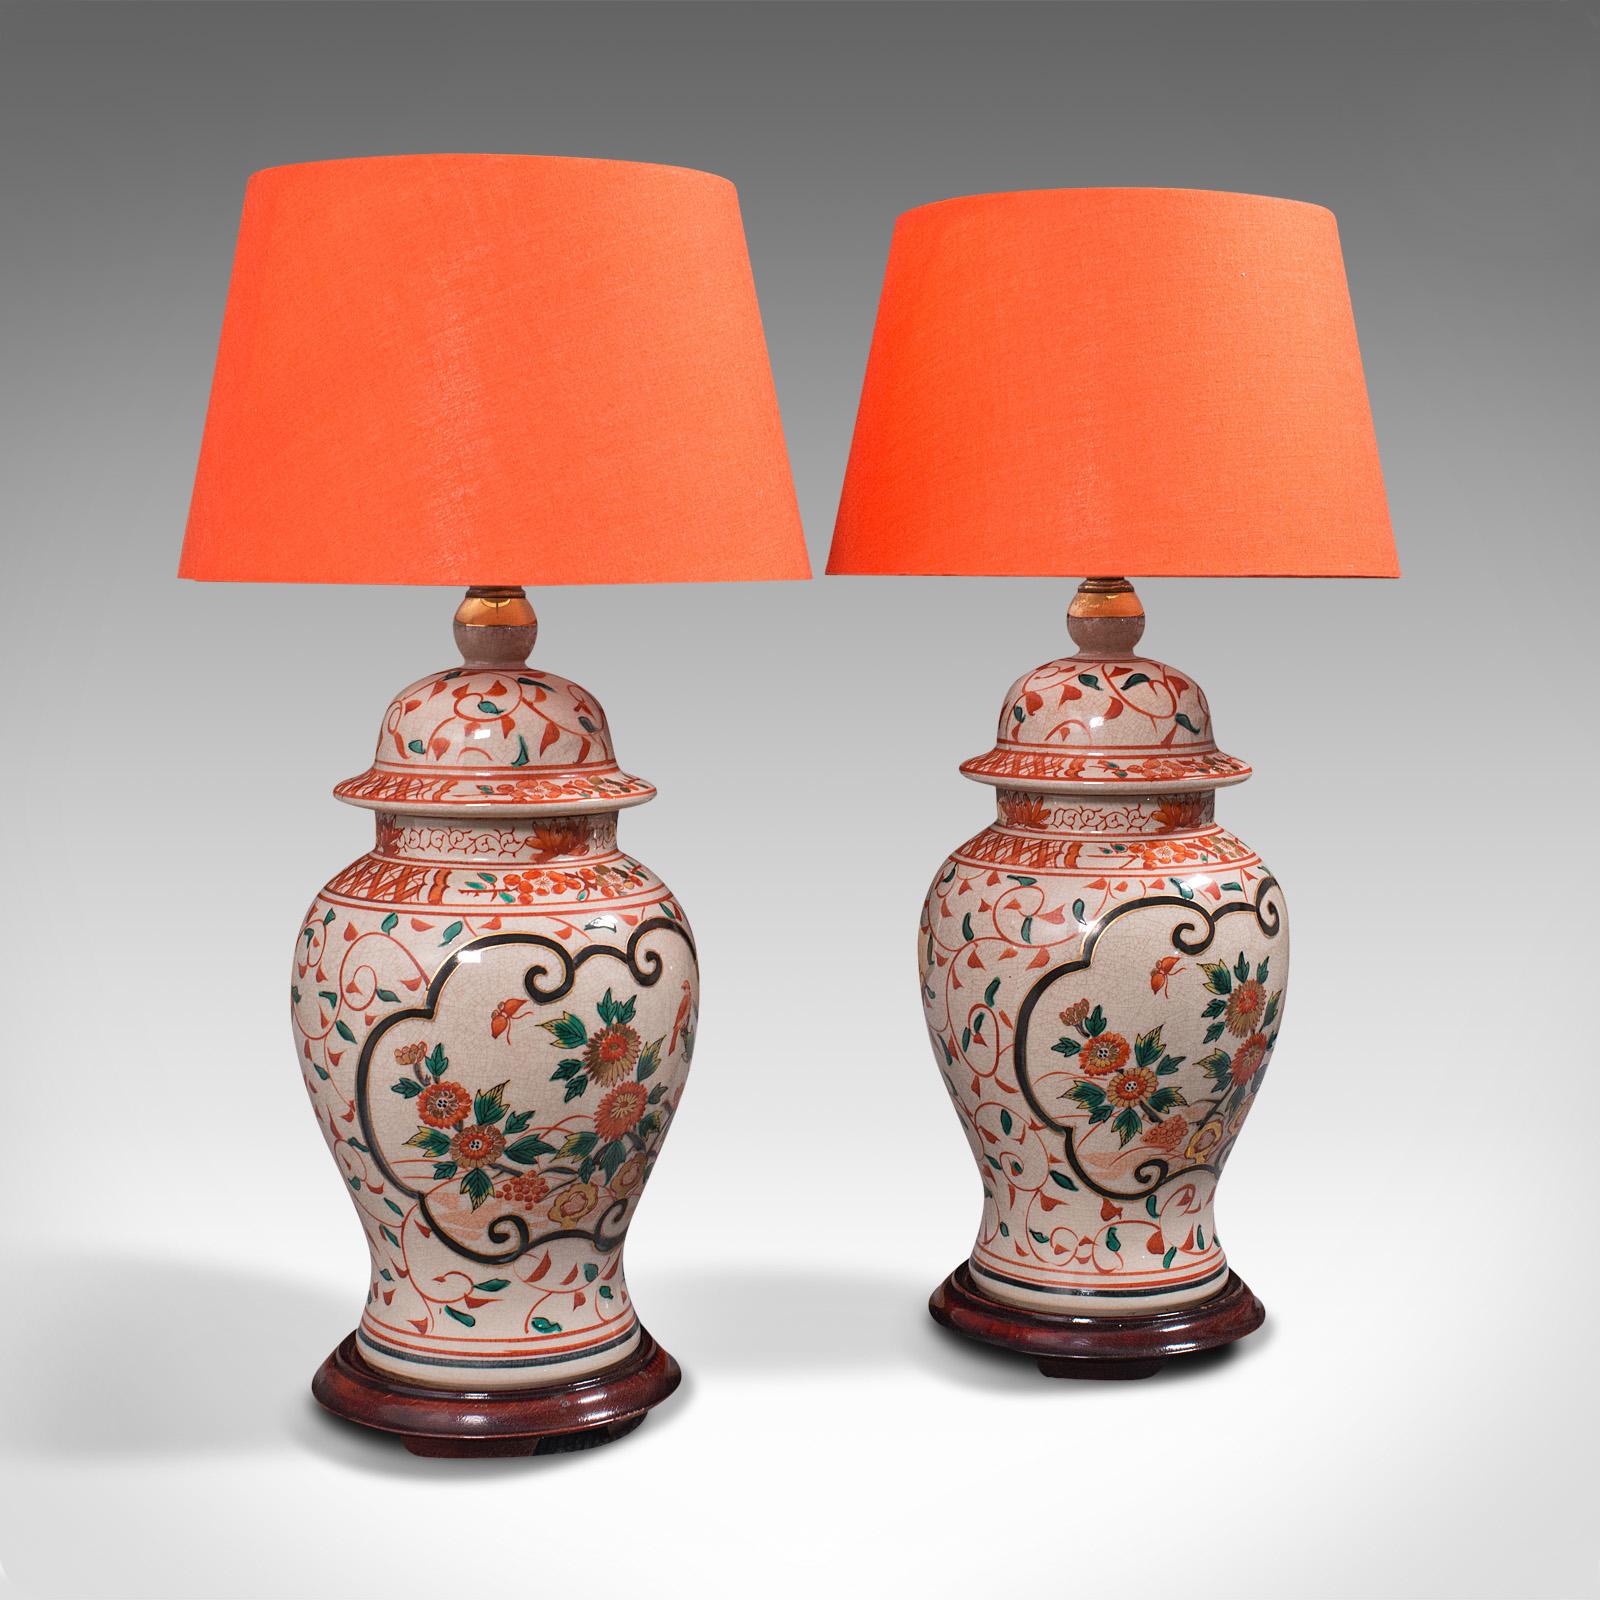 This is a pair of vintage decorative lamps. A Chinese, ceramic baluster urn table light, dating to the late Art Deco period, circa 1940.

Of appealing form and tasteful foliate finish
Displays a desirable aged patina and in good order
Classic